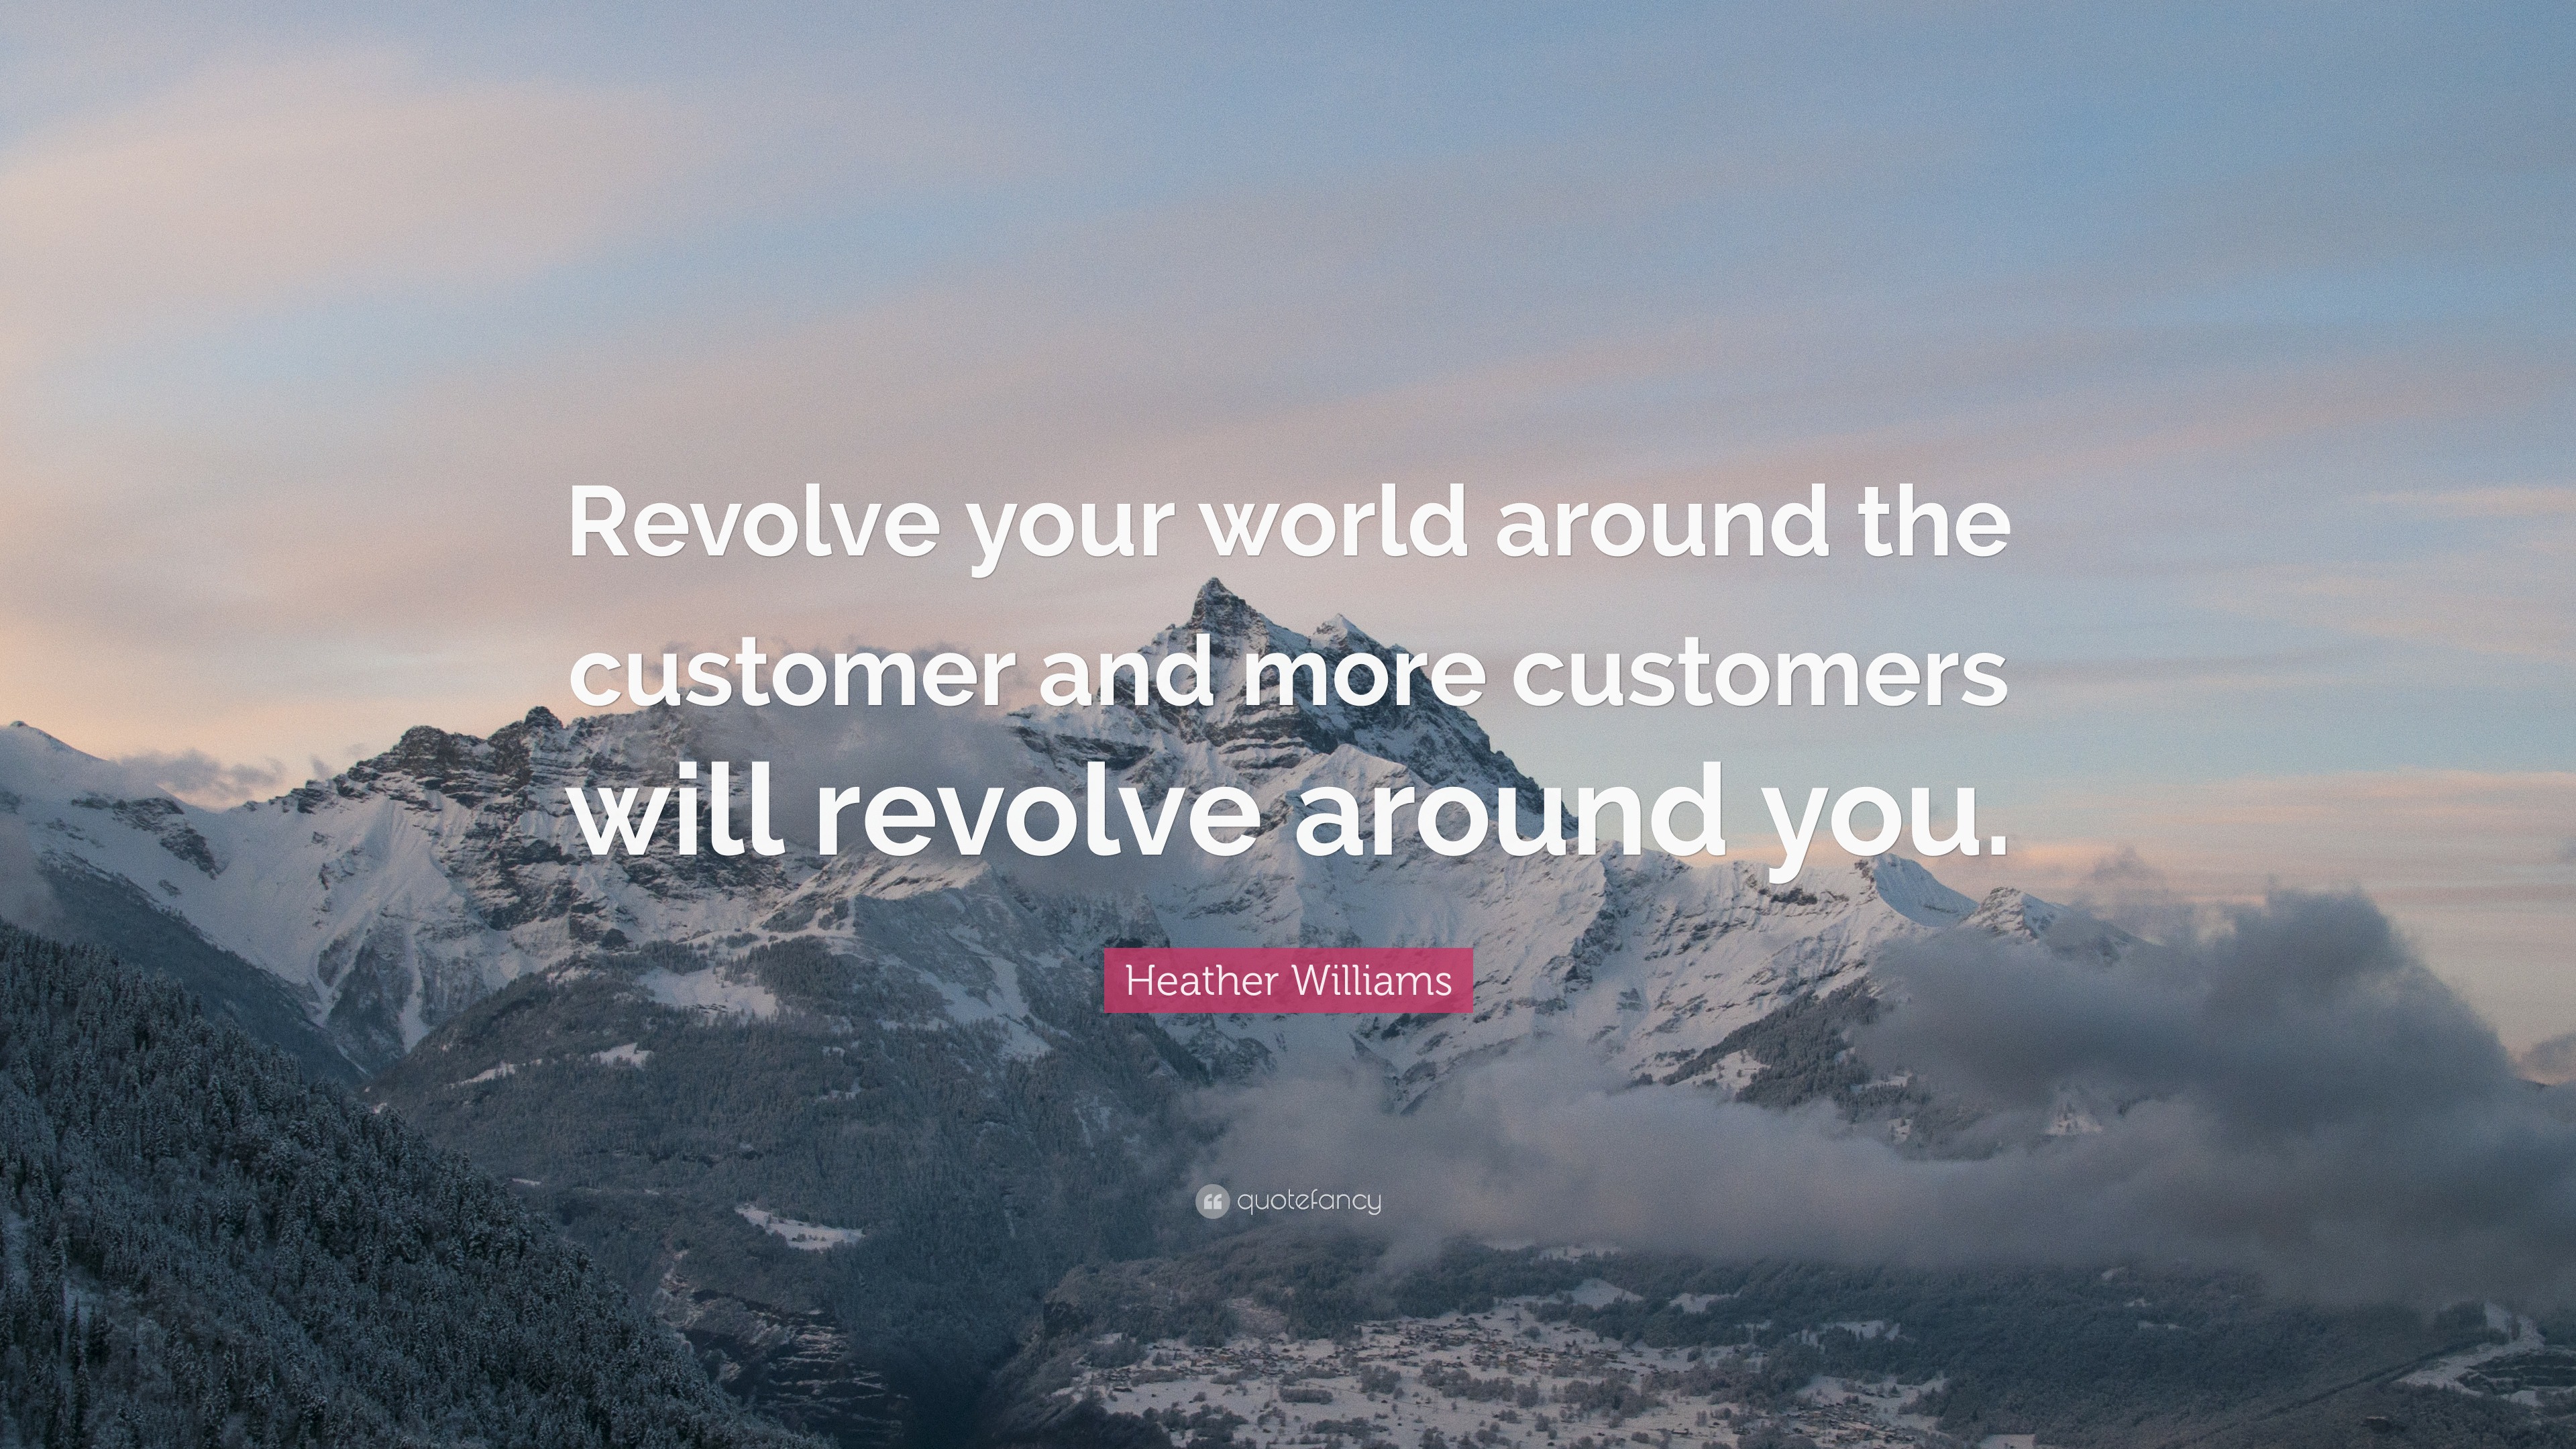 Heather Williams Quote: “Revolve your world around the customer and